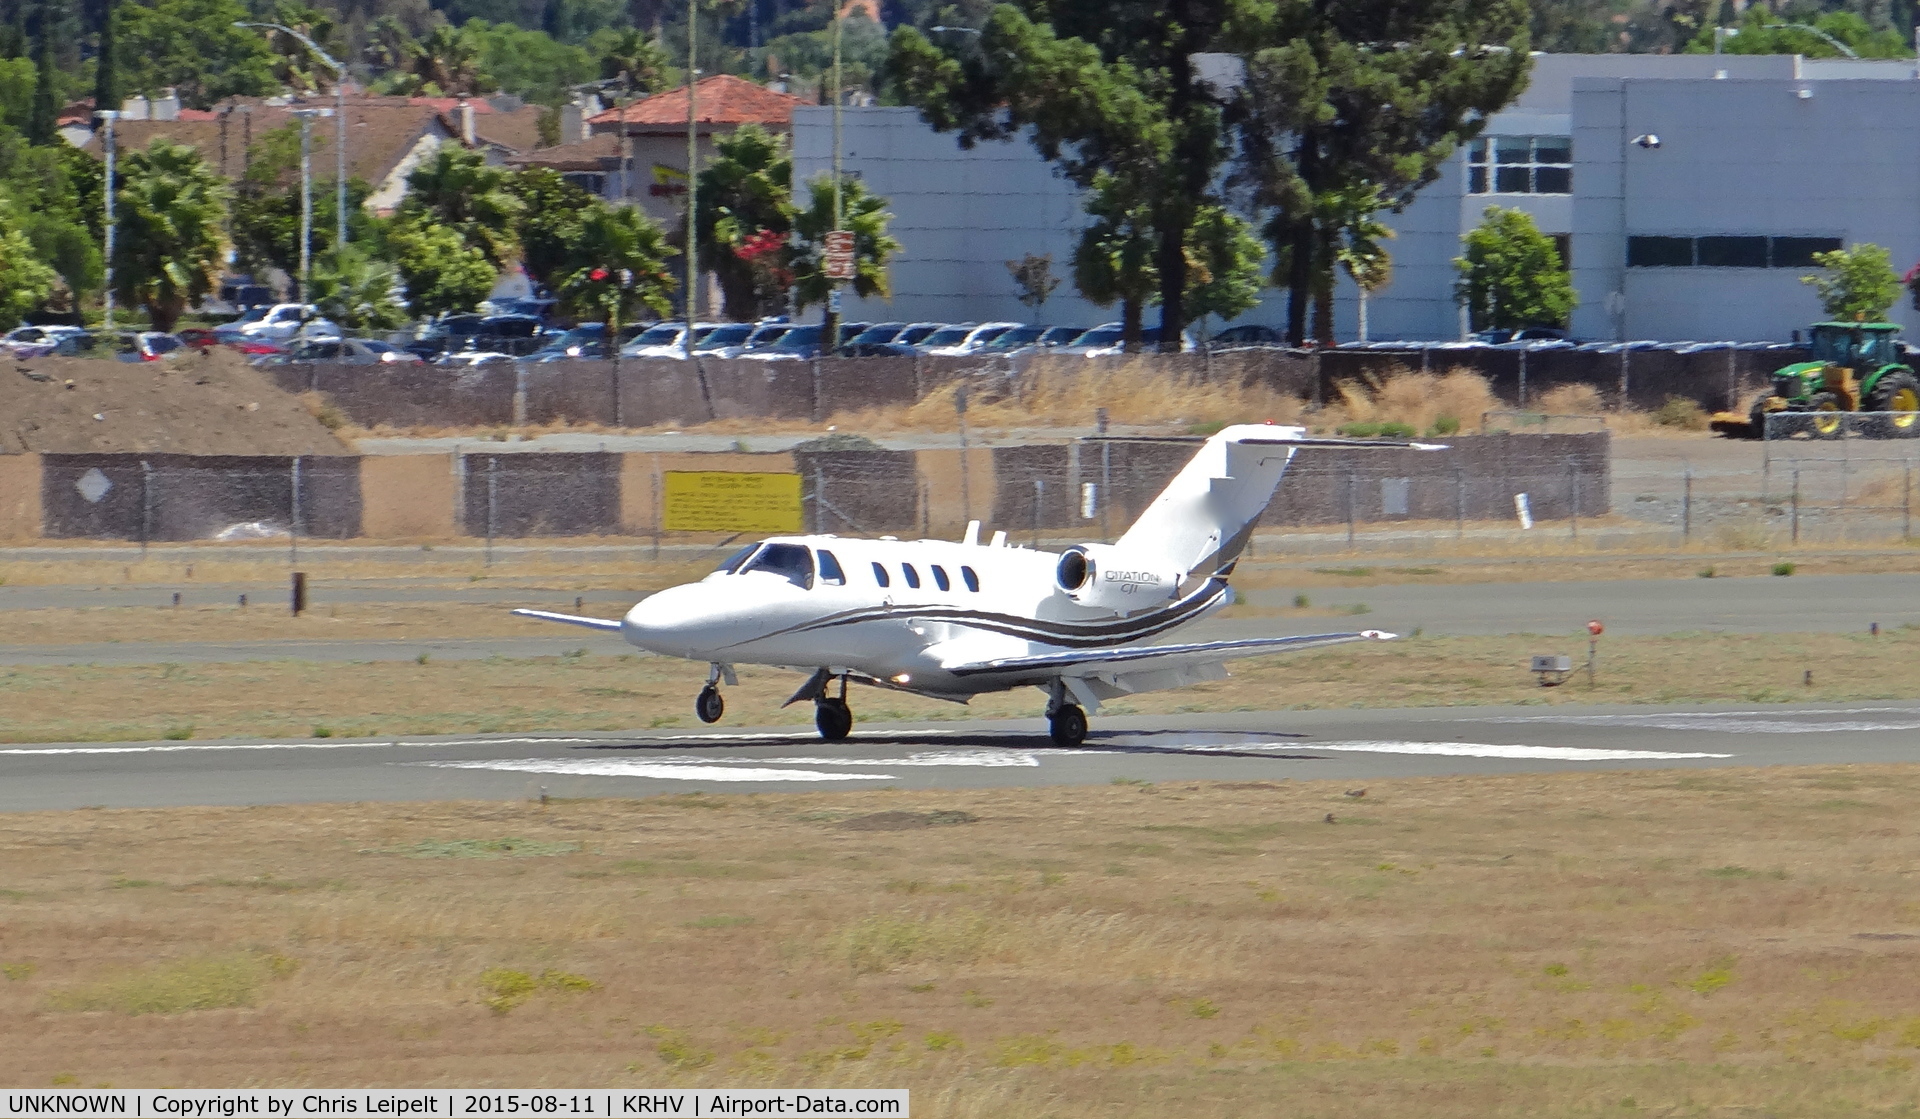 UNKNOWN, Miscellaneous Various C/N unknown, Locally-based Cessna Citation 525 landing runway 31R at Reid Hillview Airport, San Jose, CA. Photo taken from the control tower.